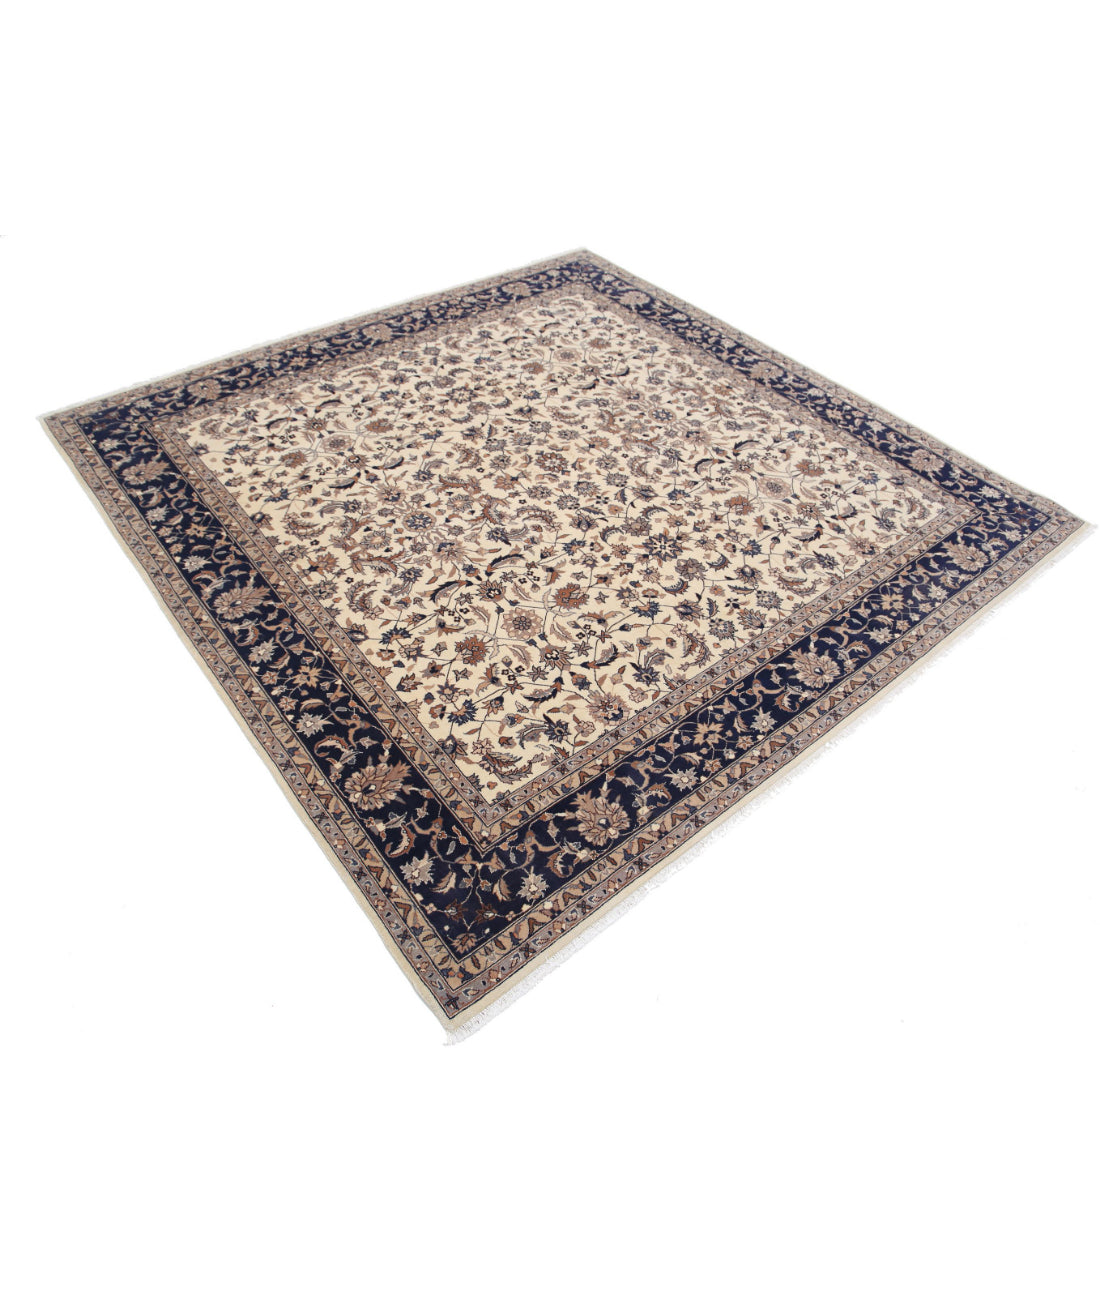 Heritage 6'8'' X 6'8'' Hand-Knotted Wool Rug 6'8'' x 6'8'' (200 X 200) / Ivory / Blue